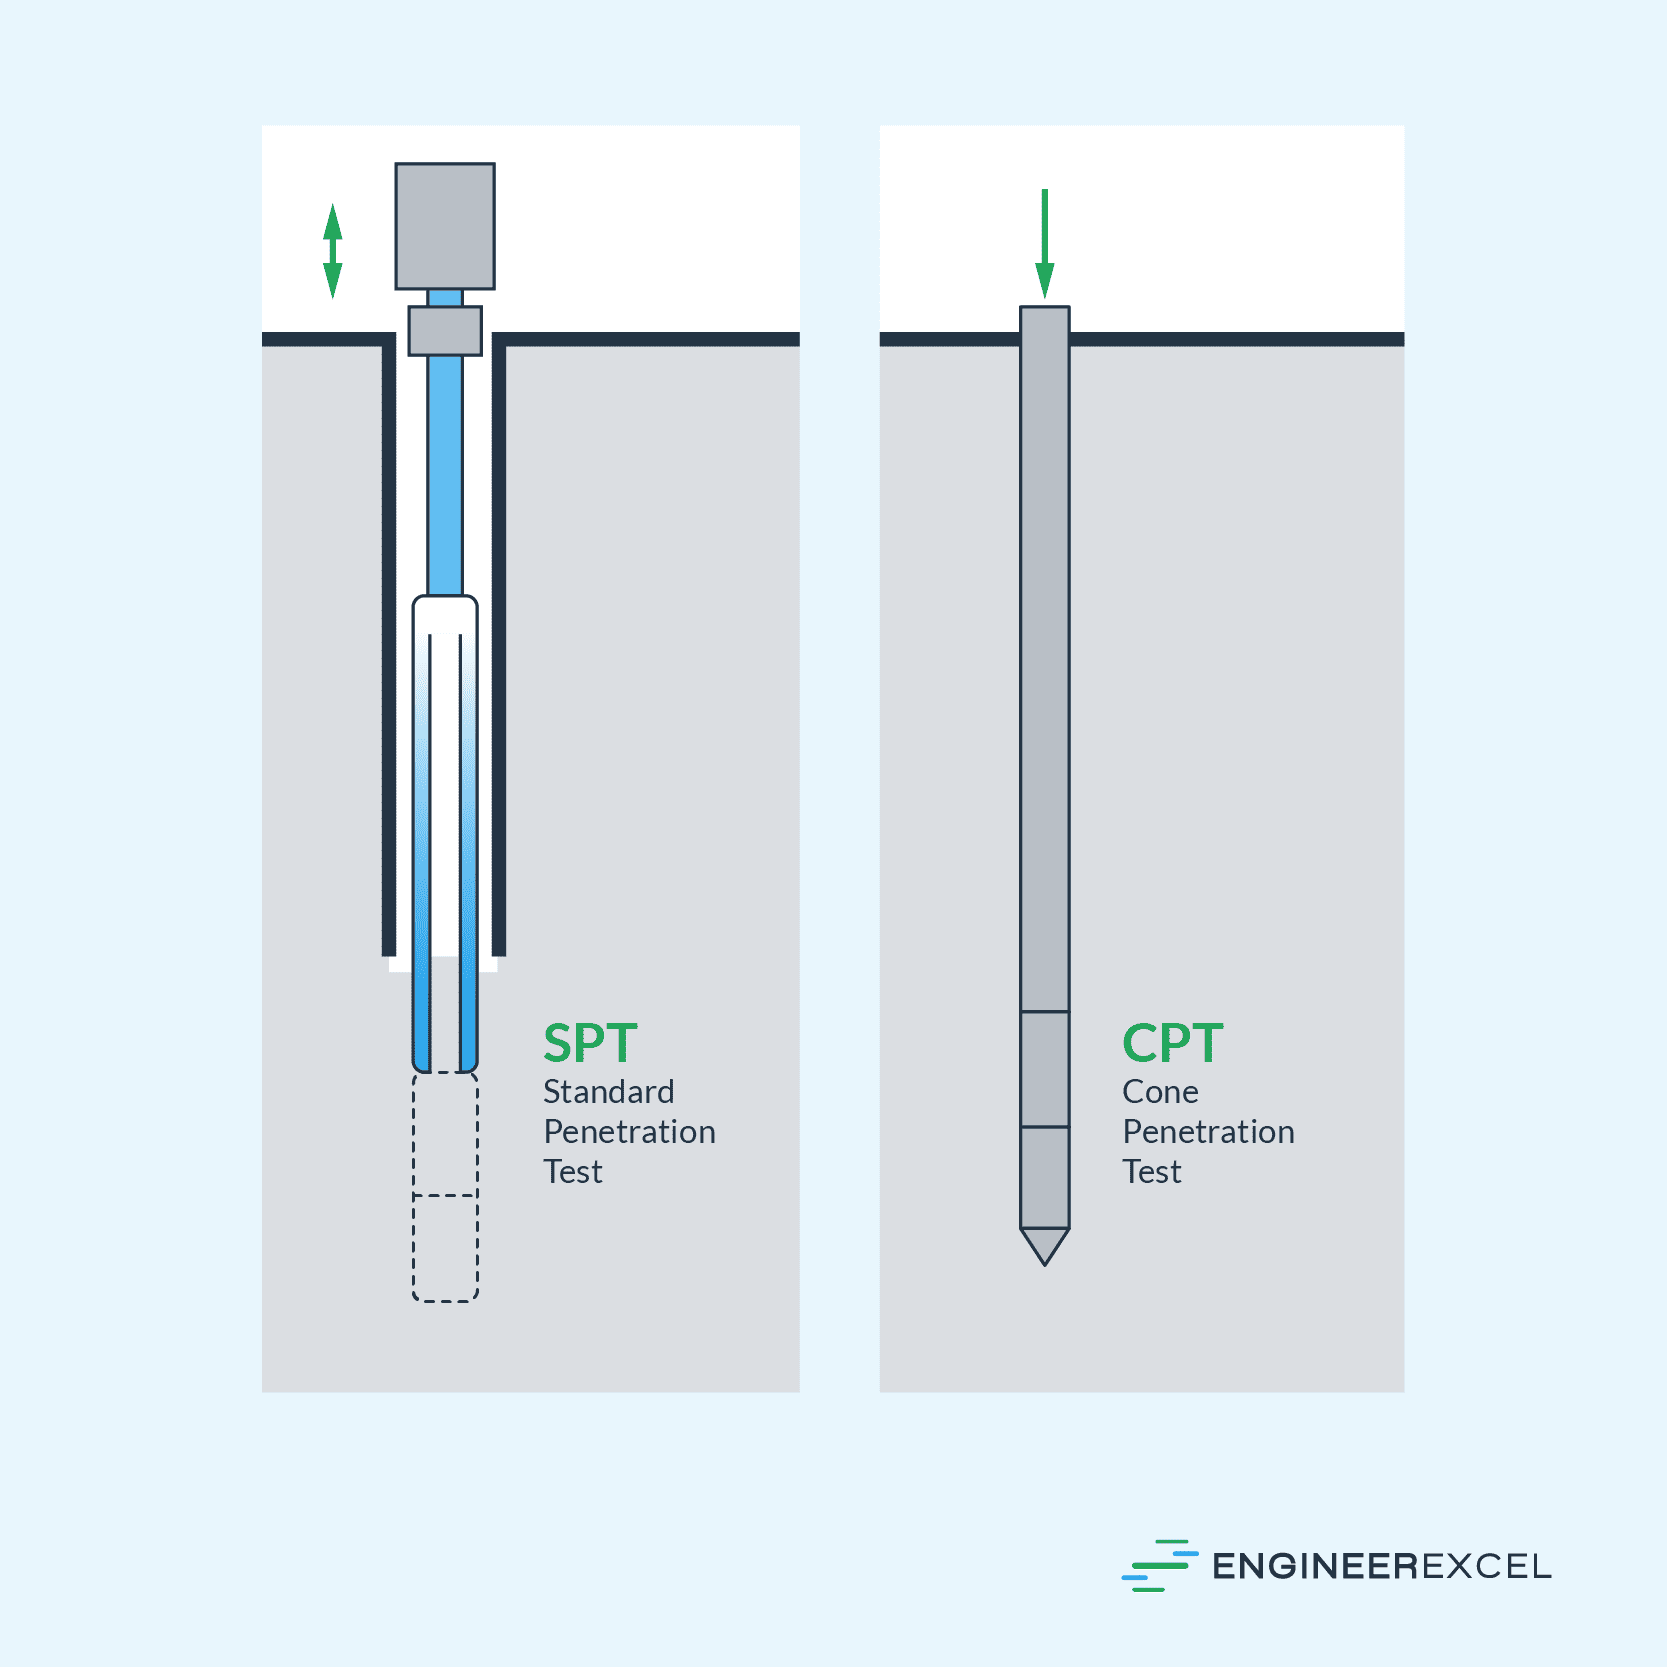 Standard Penetration Test and Cone Penetration Test